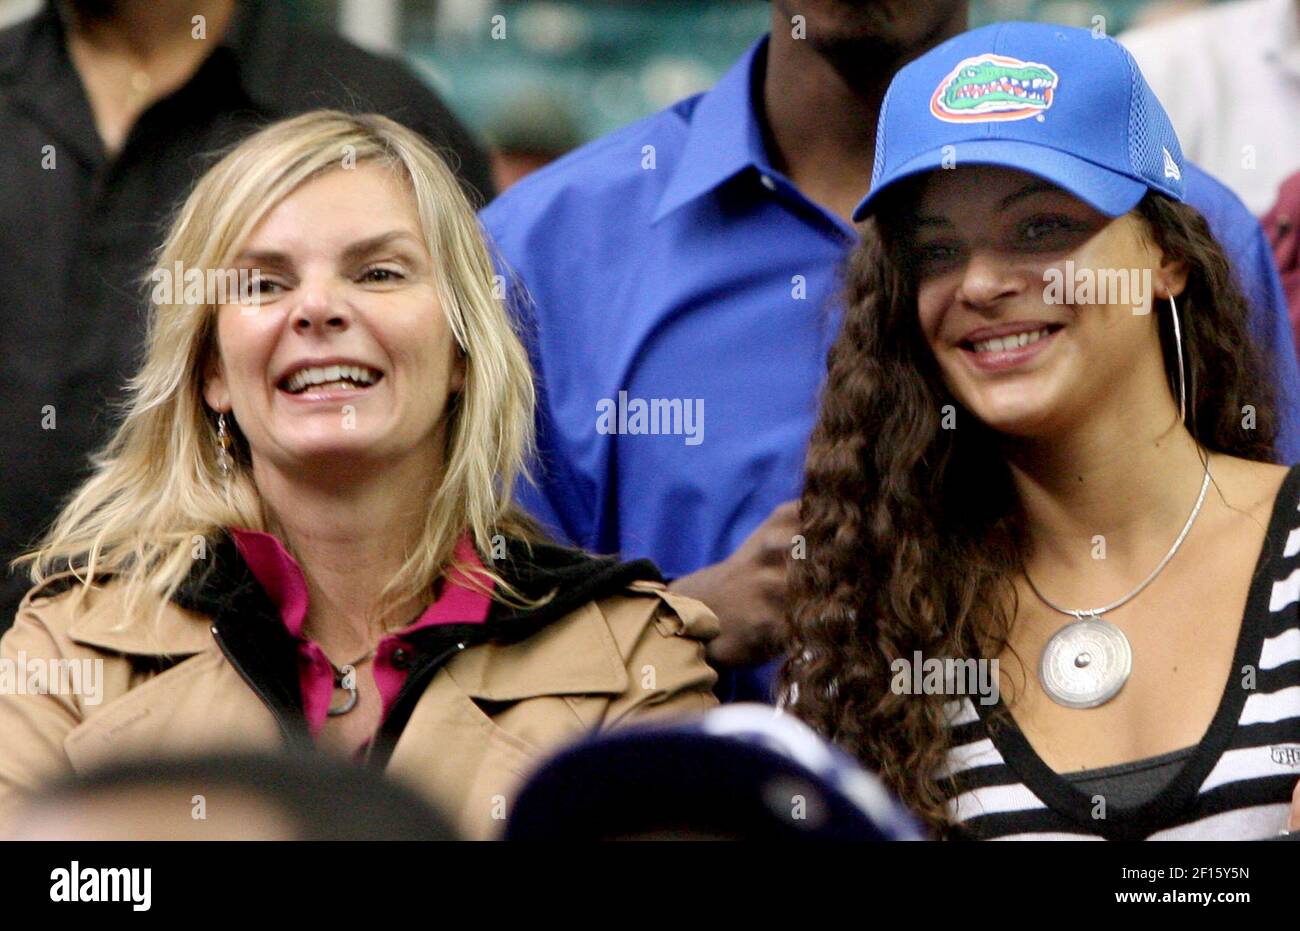 Joakim Noah's mother, Cecilia Rodhe and her daugther Yelena Noah arrive at  the NCAA Division 1 men's basketball championship game in Atlanta, GA, USA  on April 2, 2007. Photo by Christophe Guibbaud/Cameleon/ABACAPRESS.COM